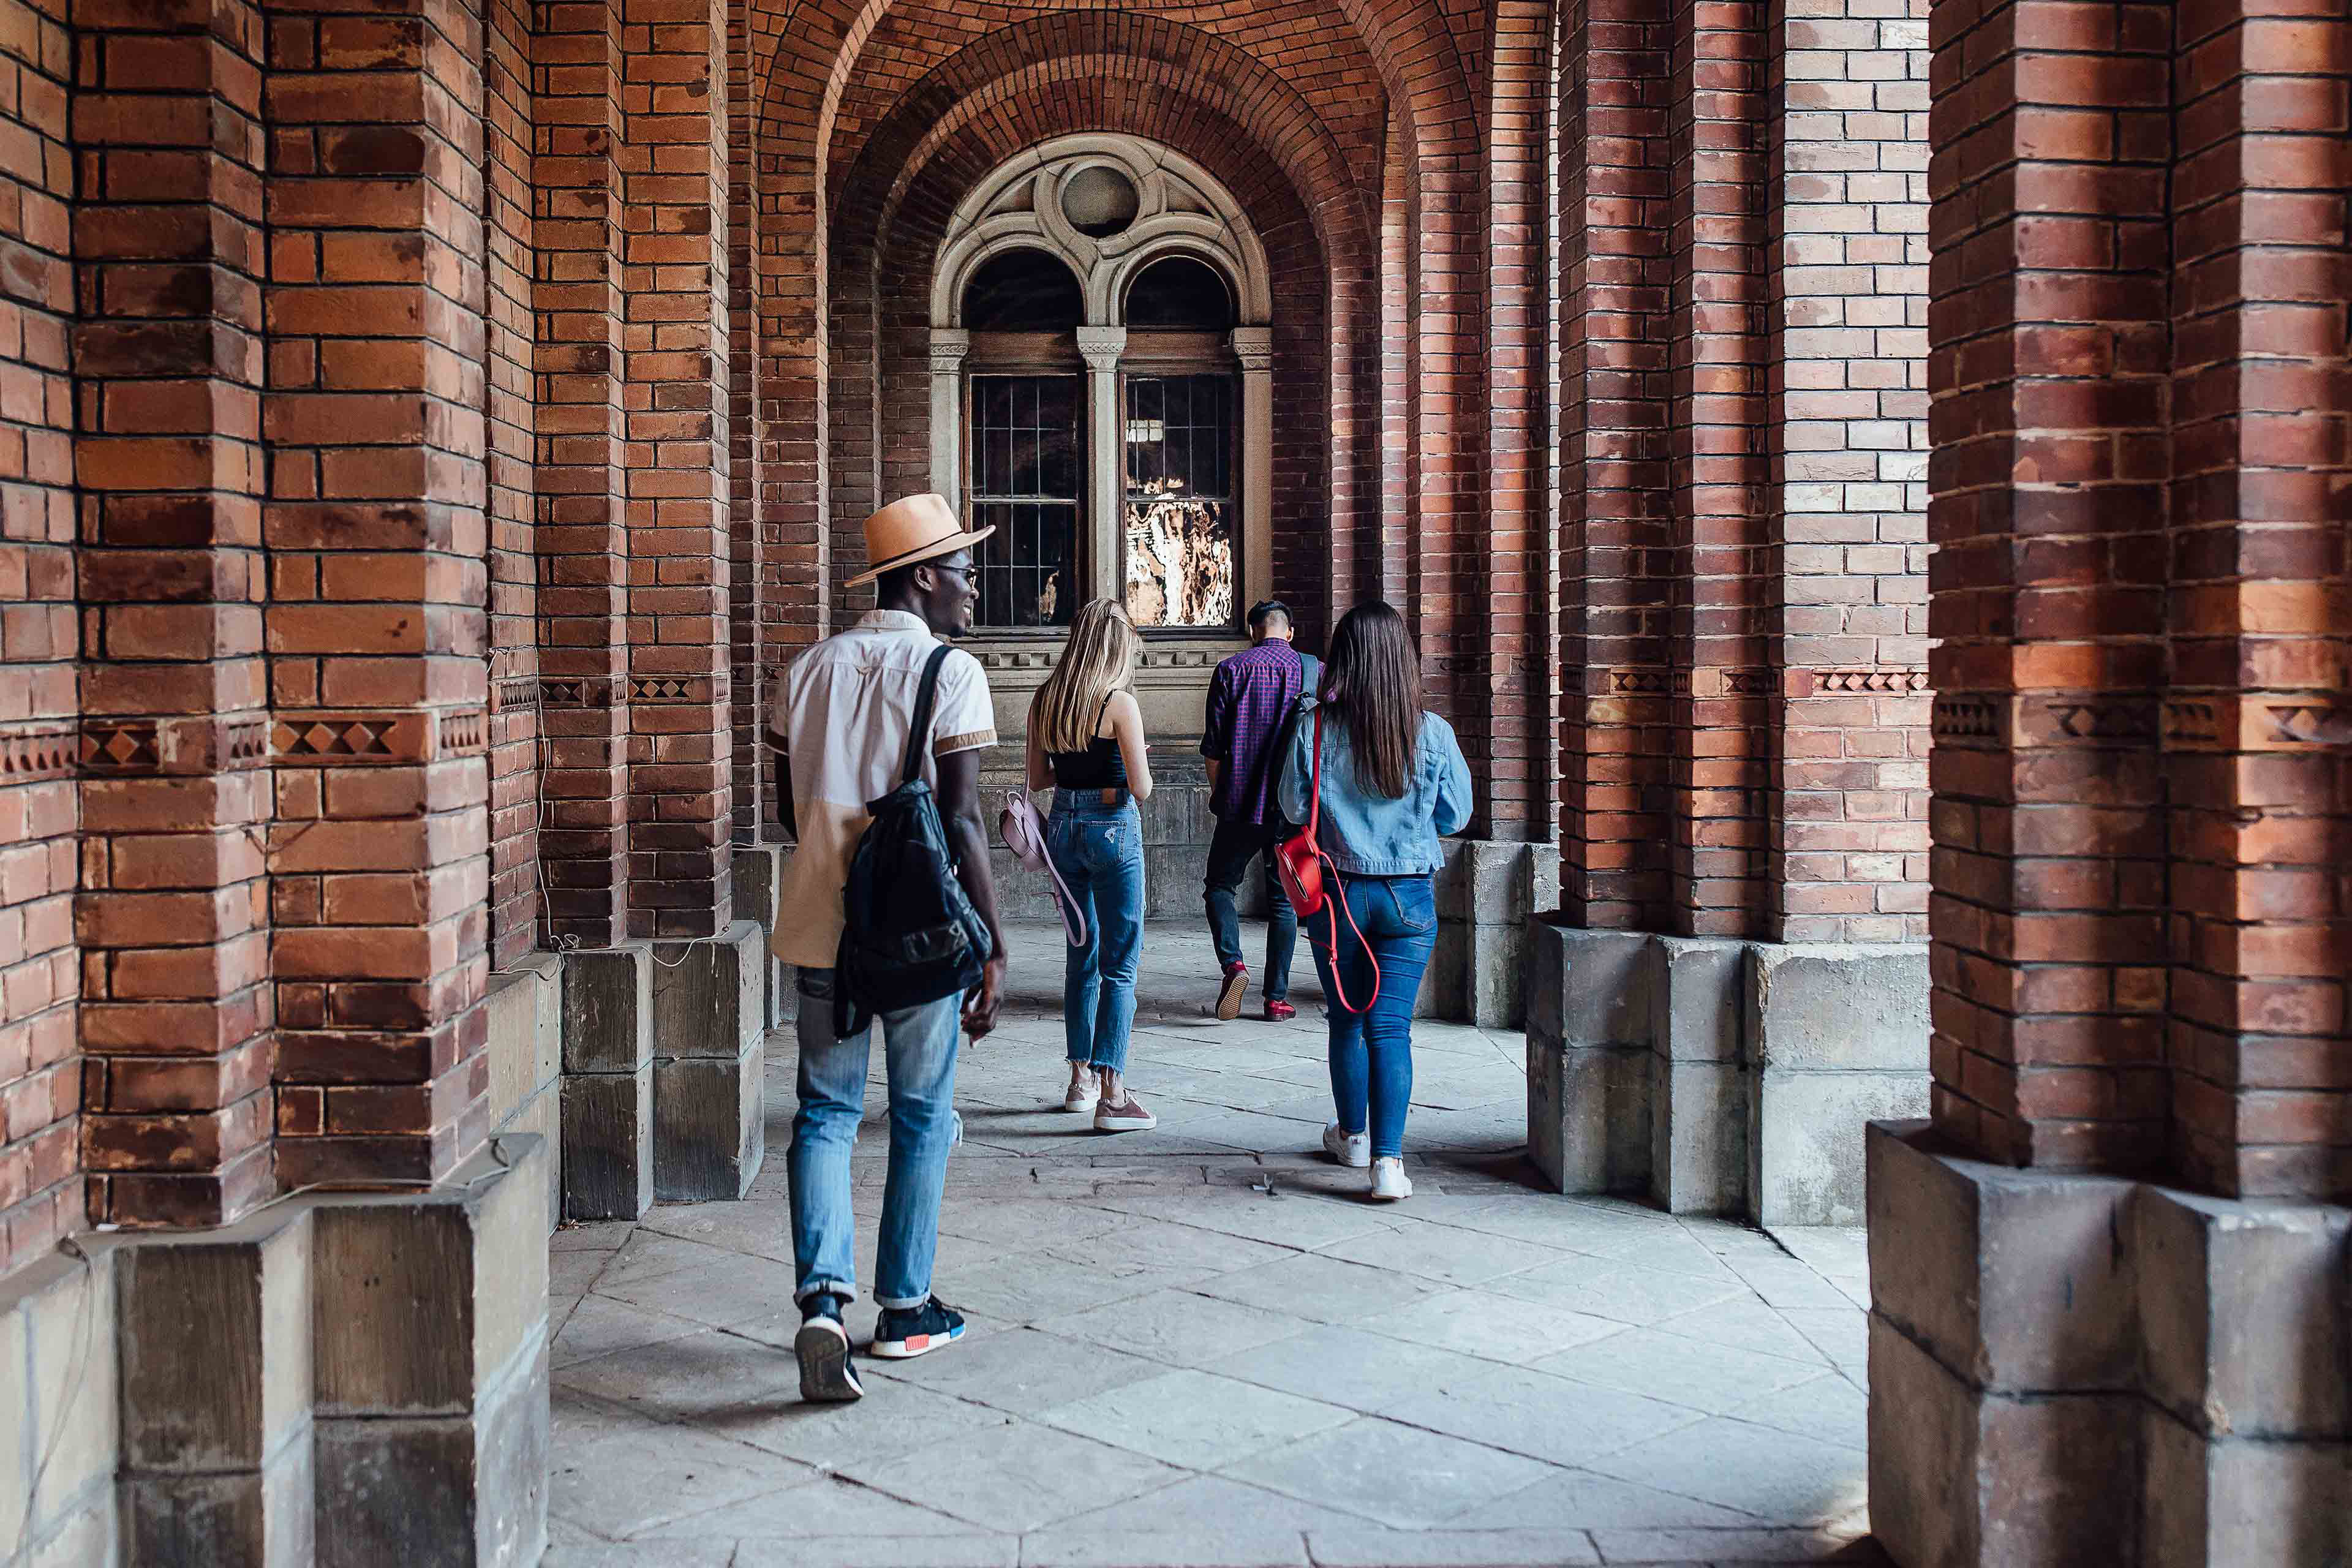 Students walking through an academic building